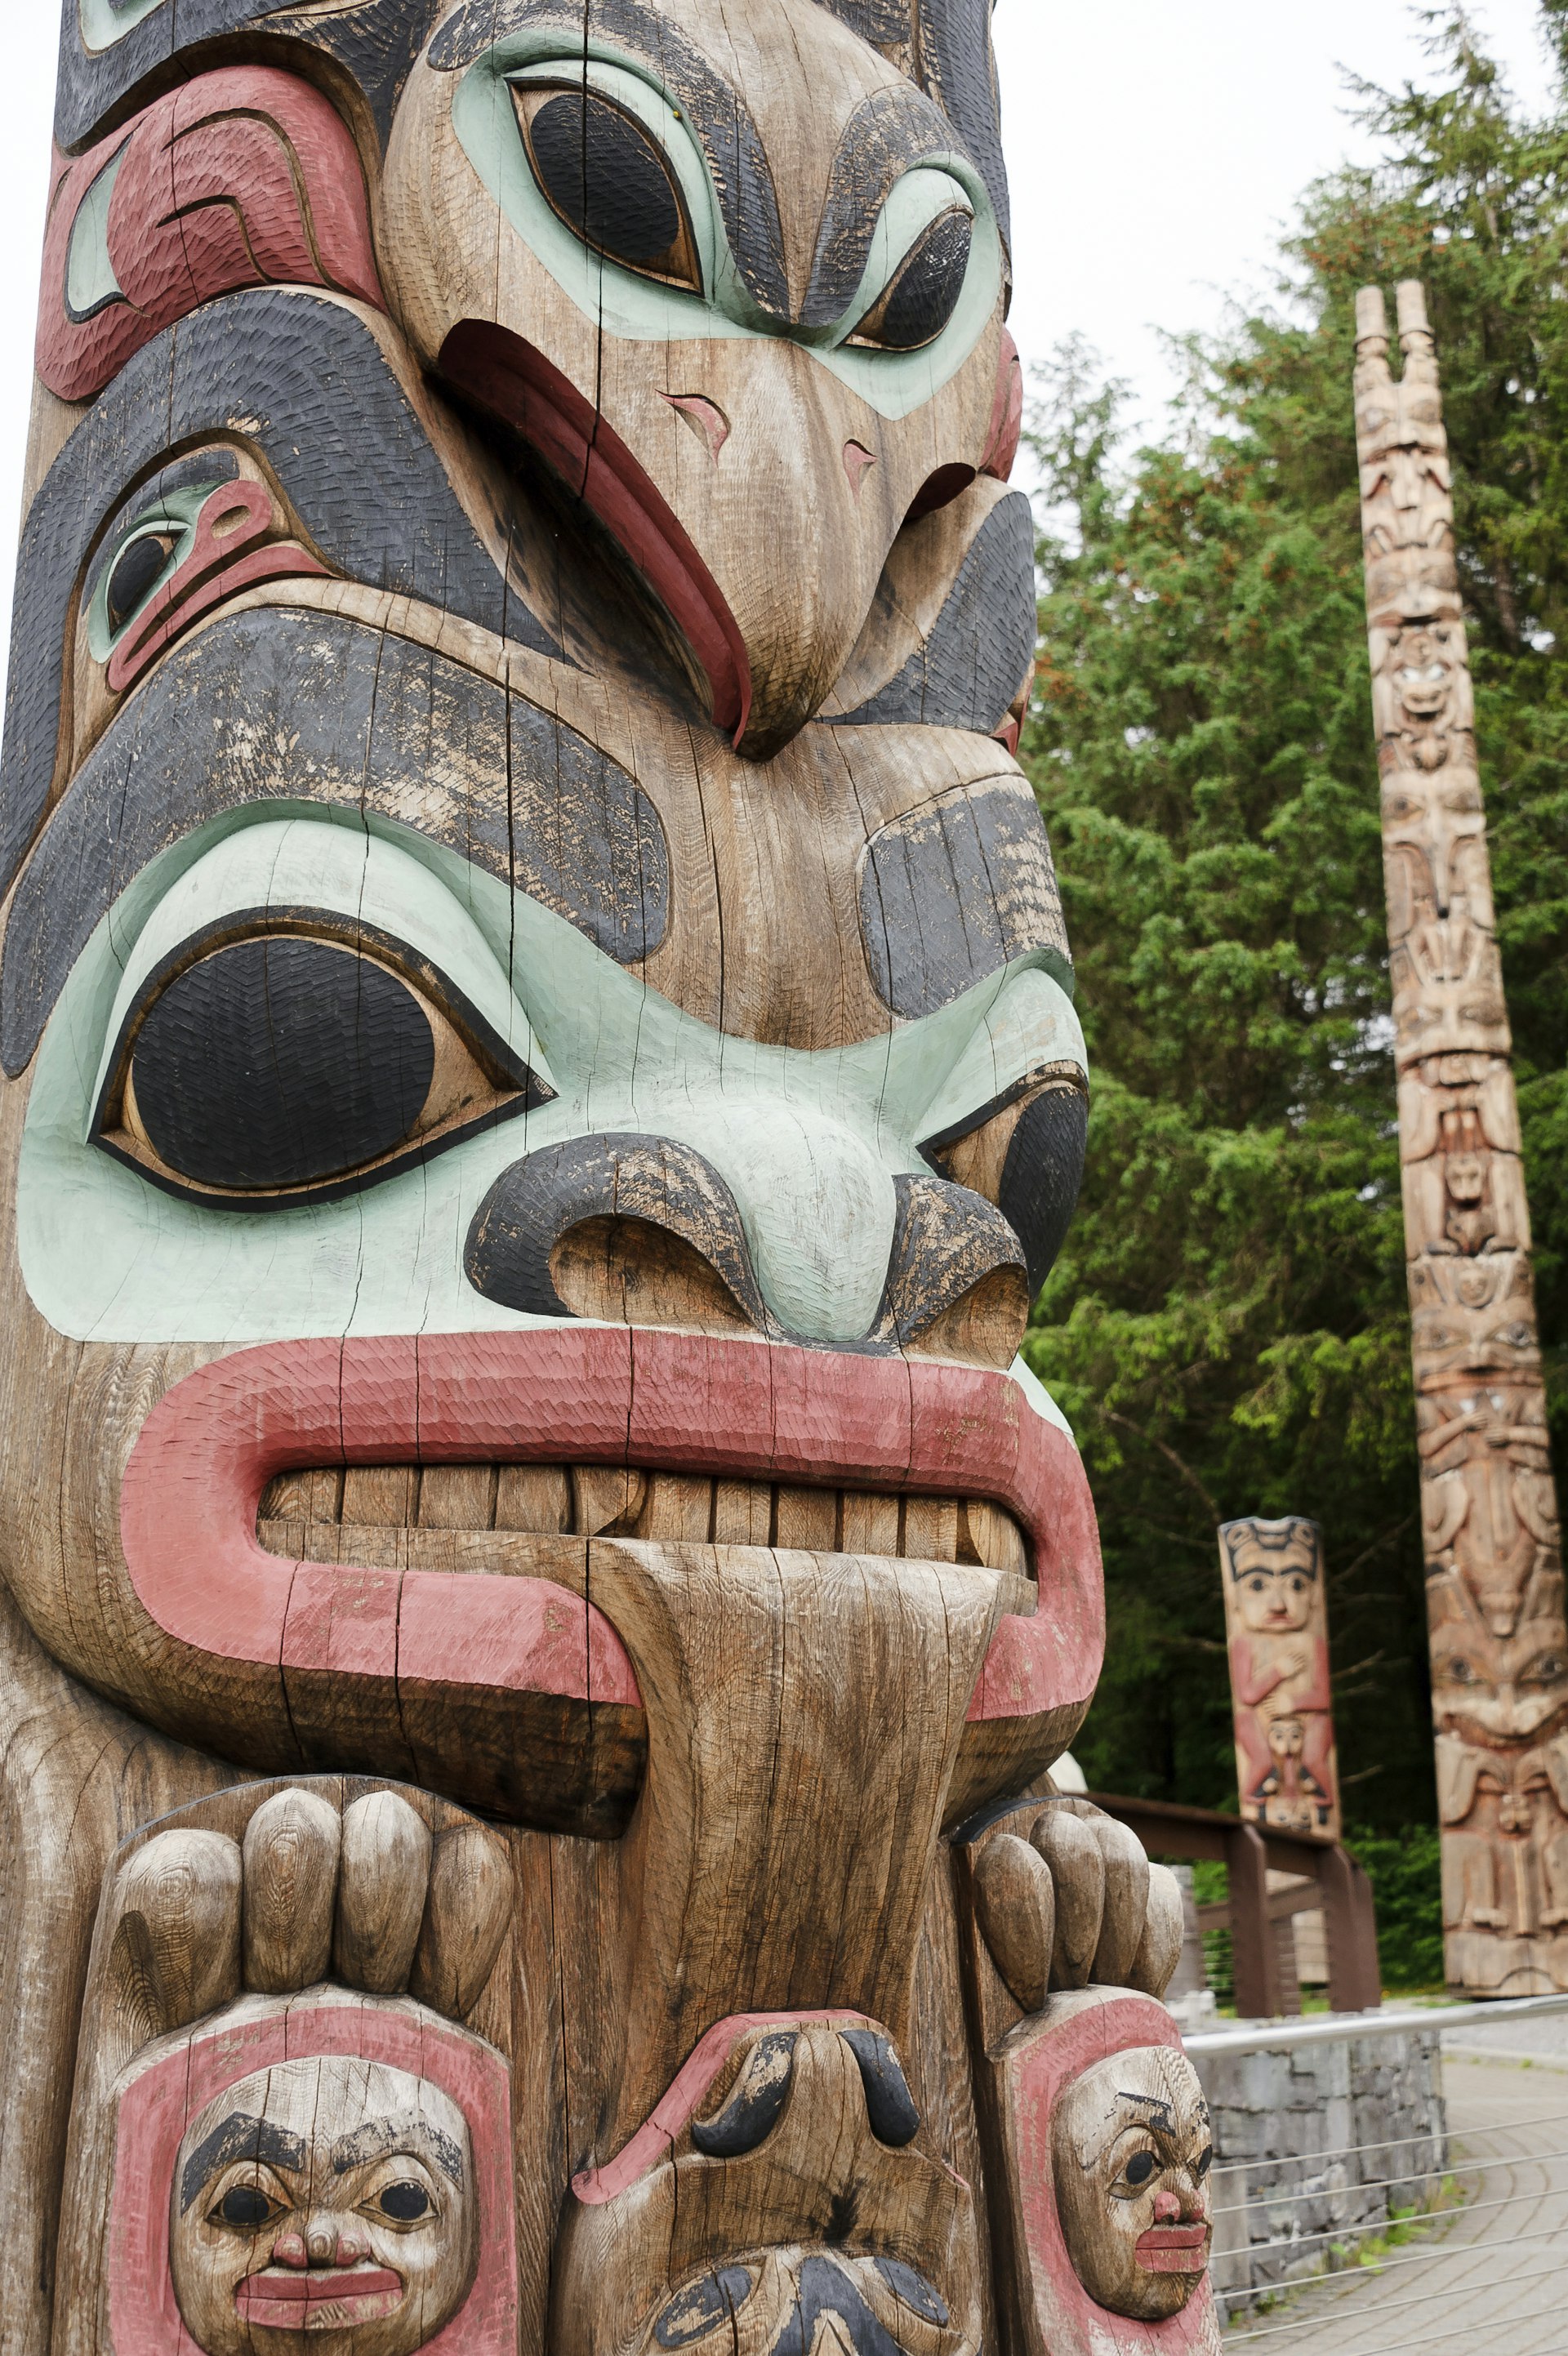 Three totem poles stand among trees